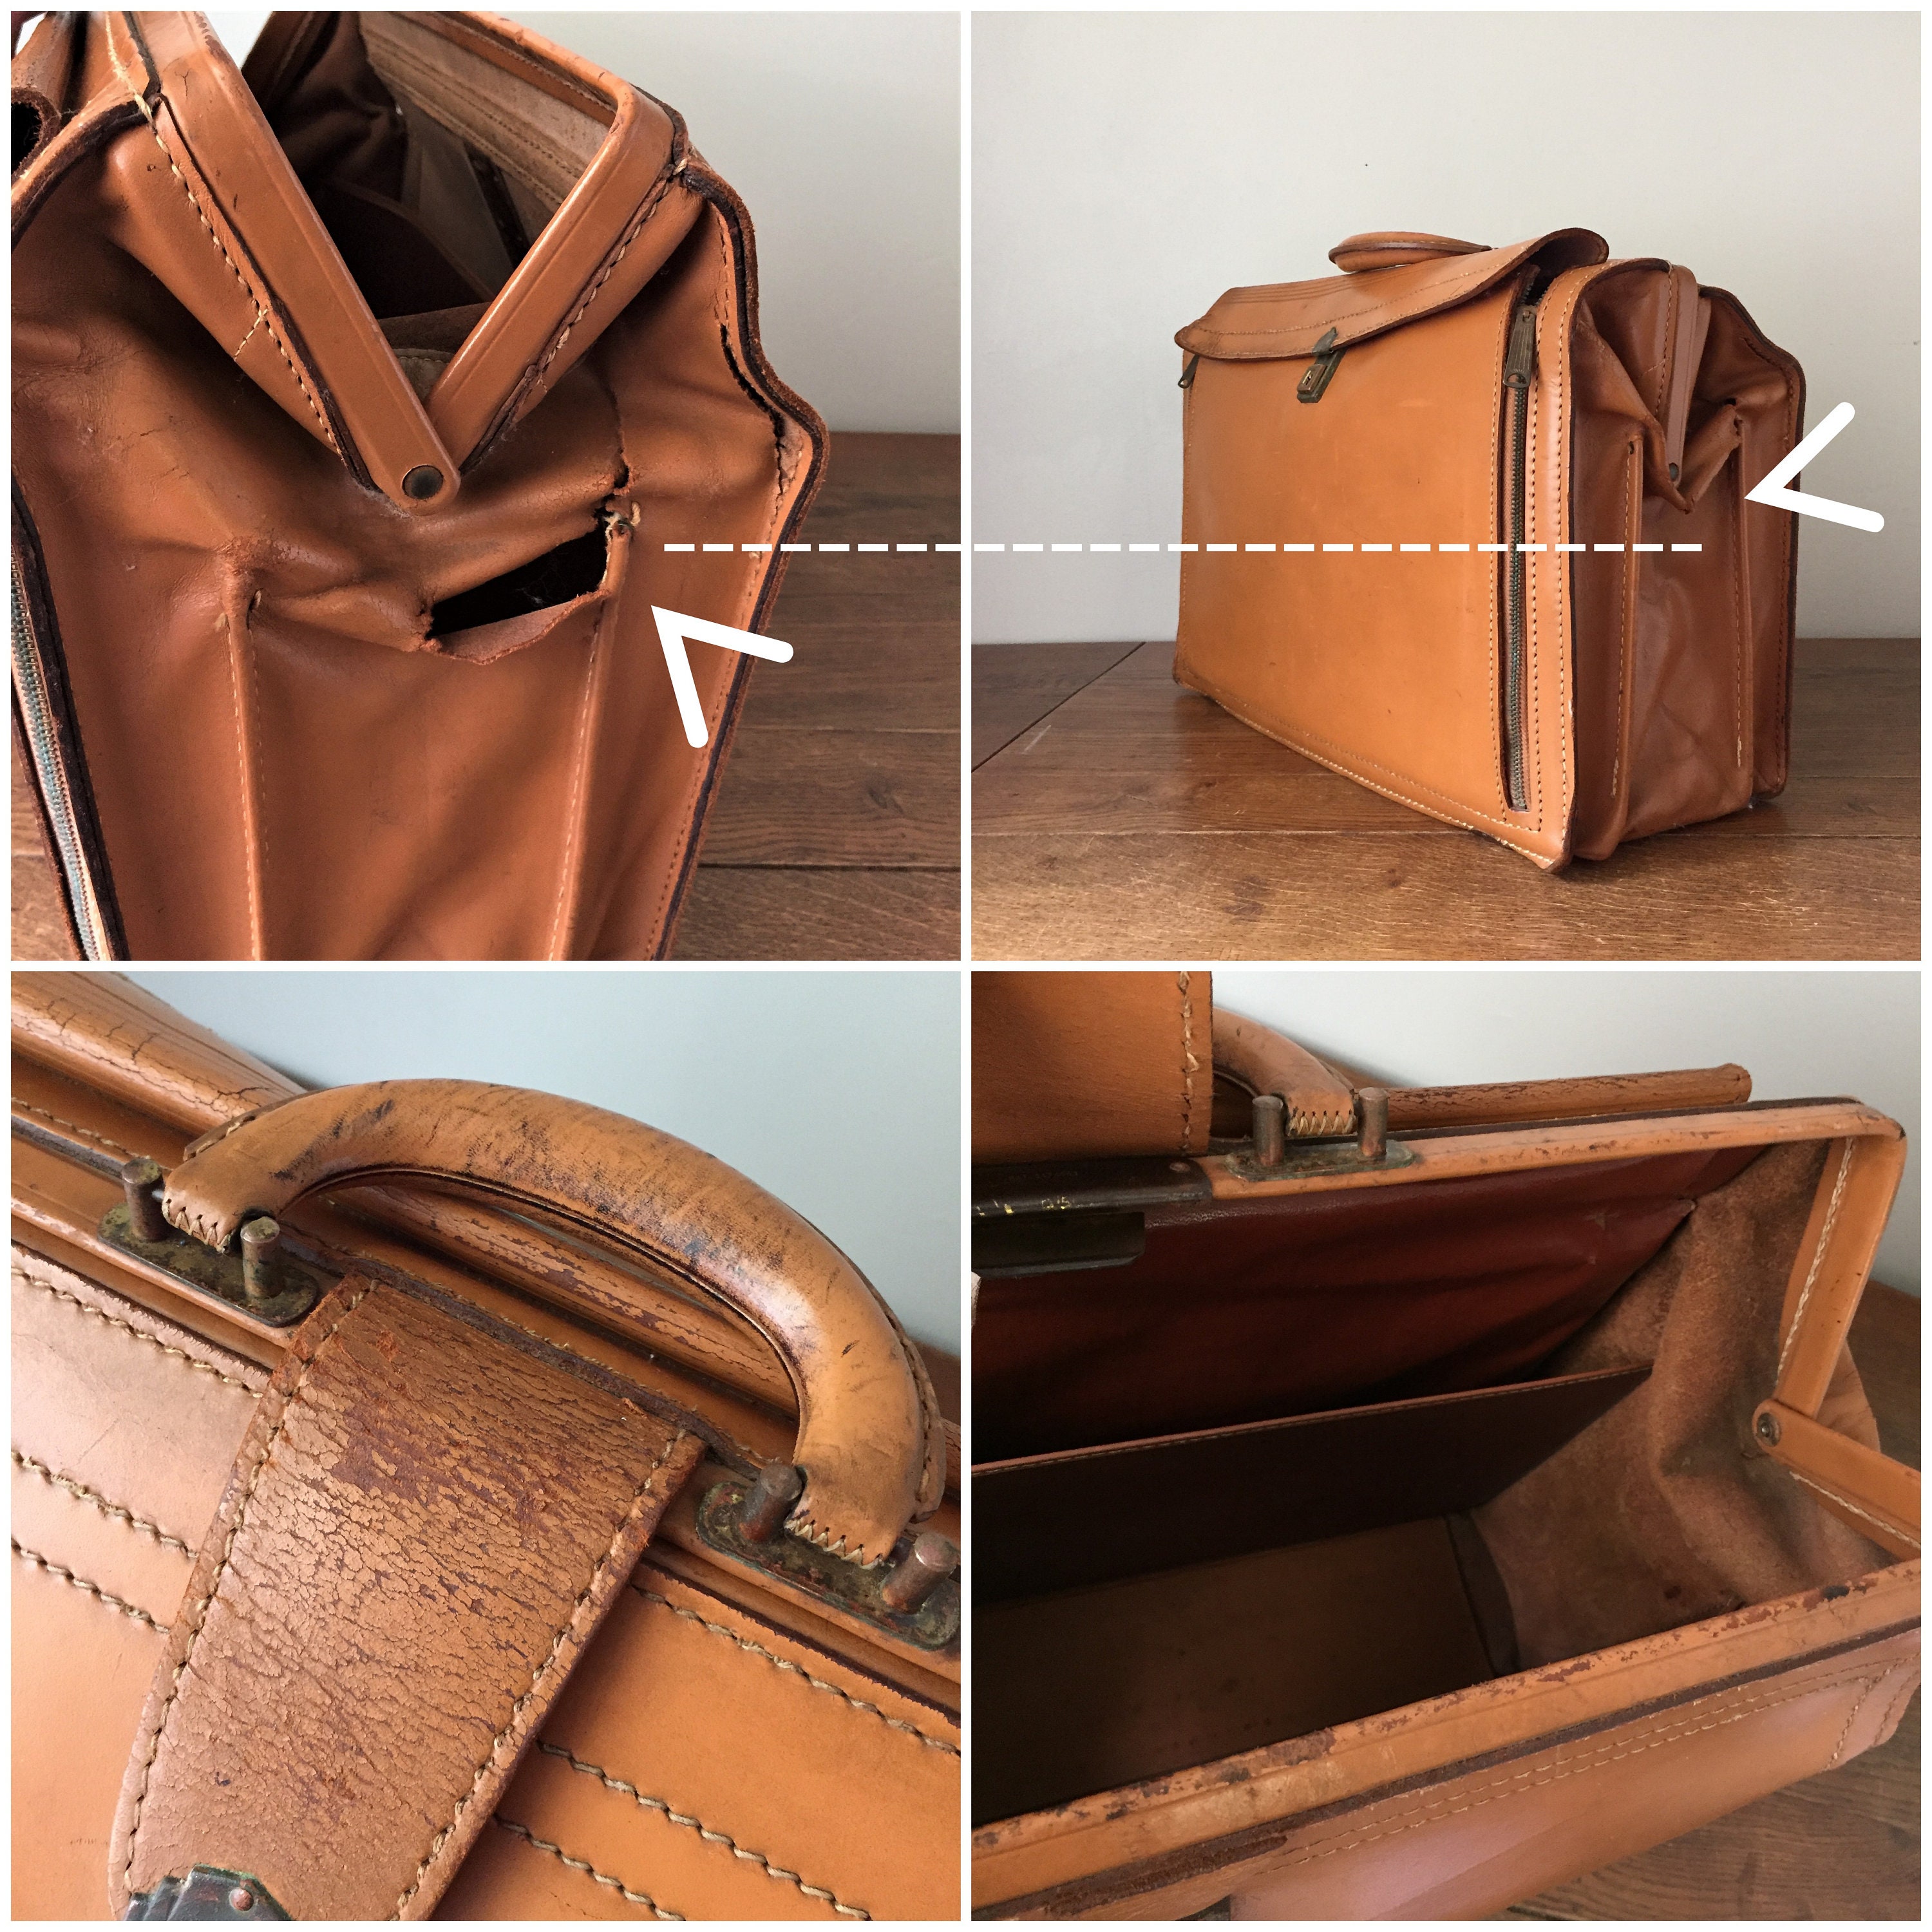 Early 20th Century Hartman Brown Leather Briefcase